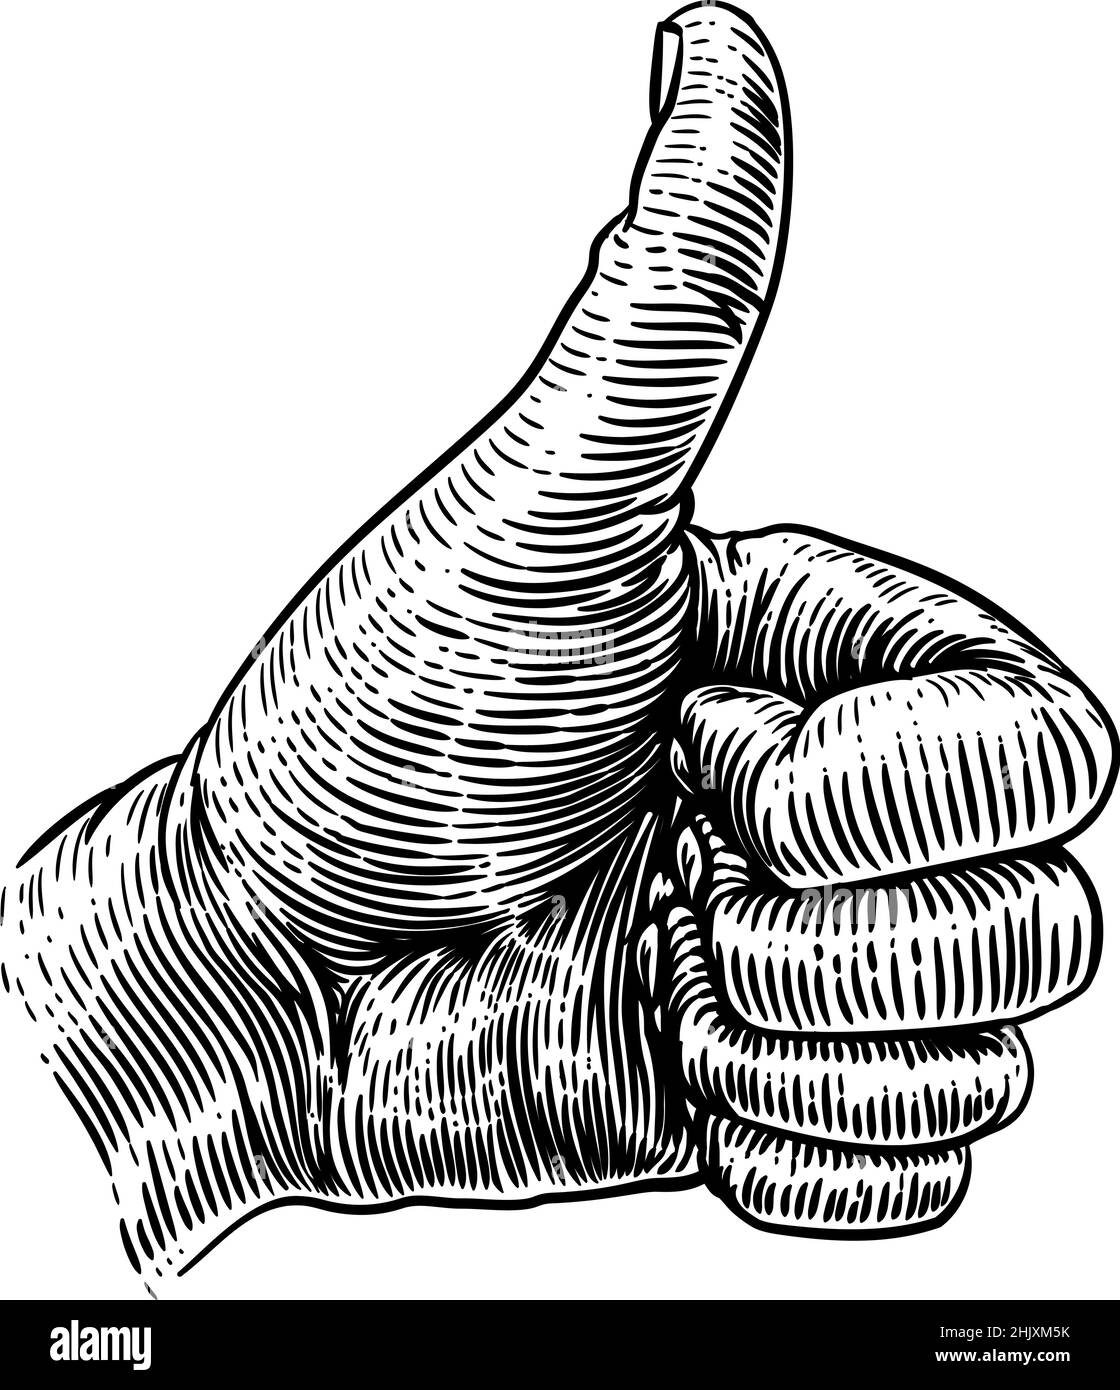 Thumb Up Hand Sign Retro Vintage Woodcut Stock Vector